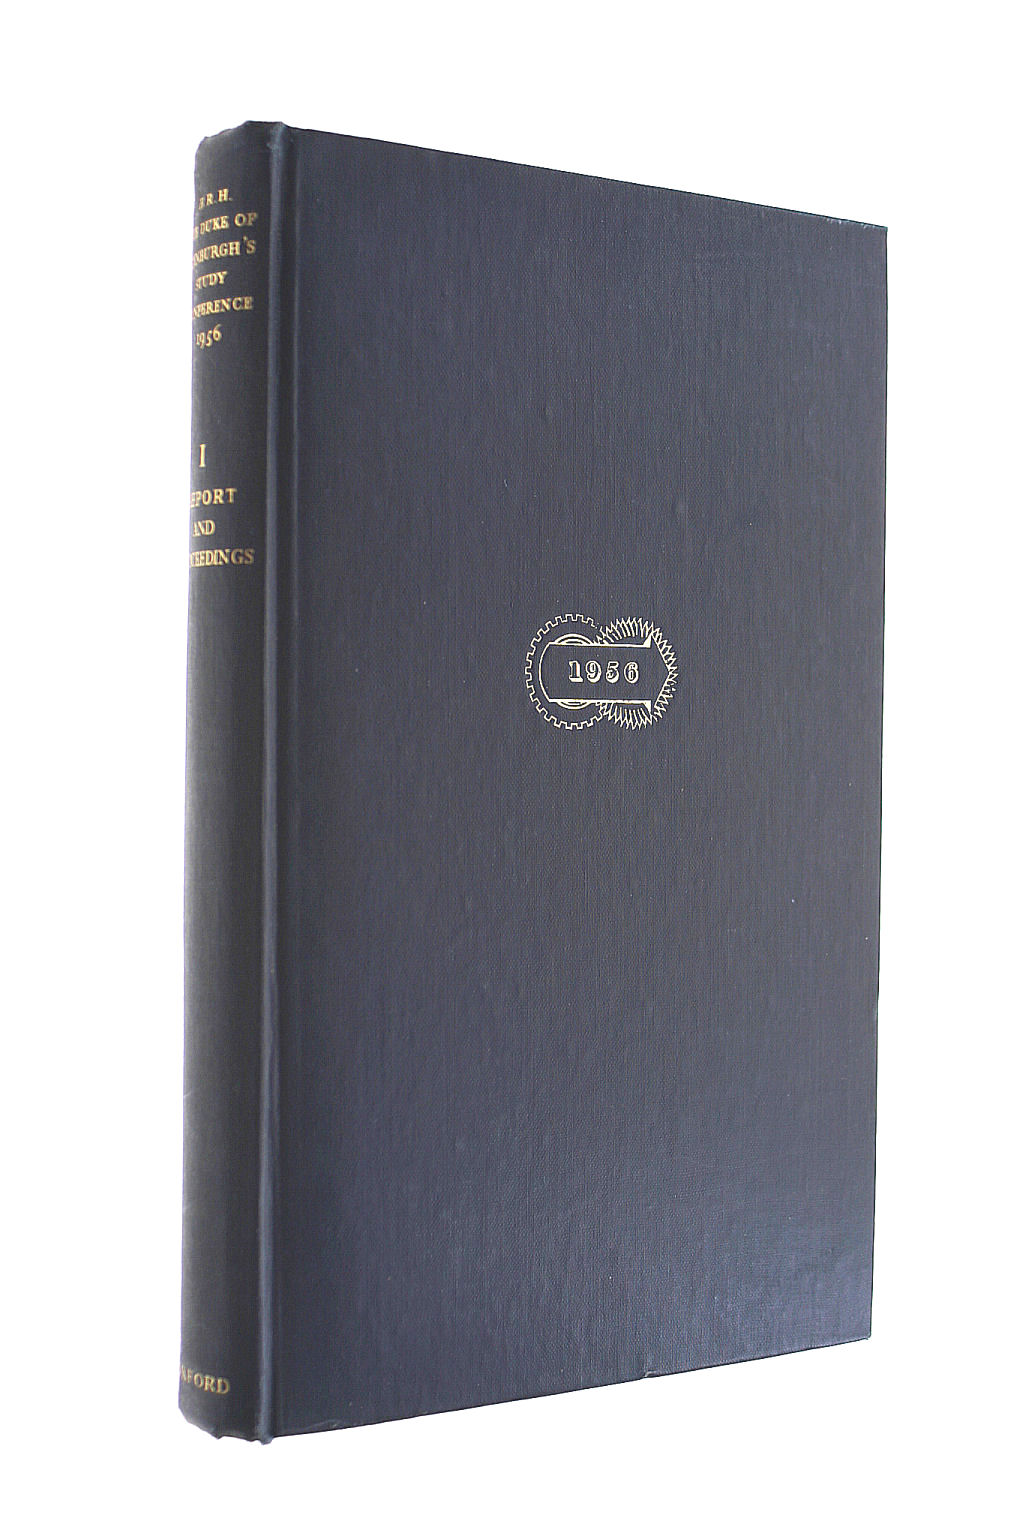 DUKE OF EDINBURGH (FOREWARD) - Report and proceedings : His Royal Highness the Duke of Edinburgh's Study Conference on the Human Problems of Industrial Communities within the Commonwealth and Empire, 9-27 July 1956 - Volume 1